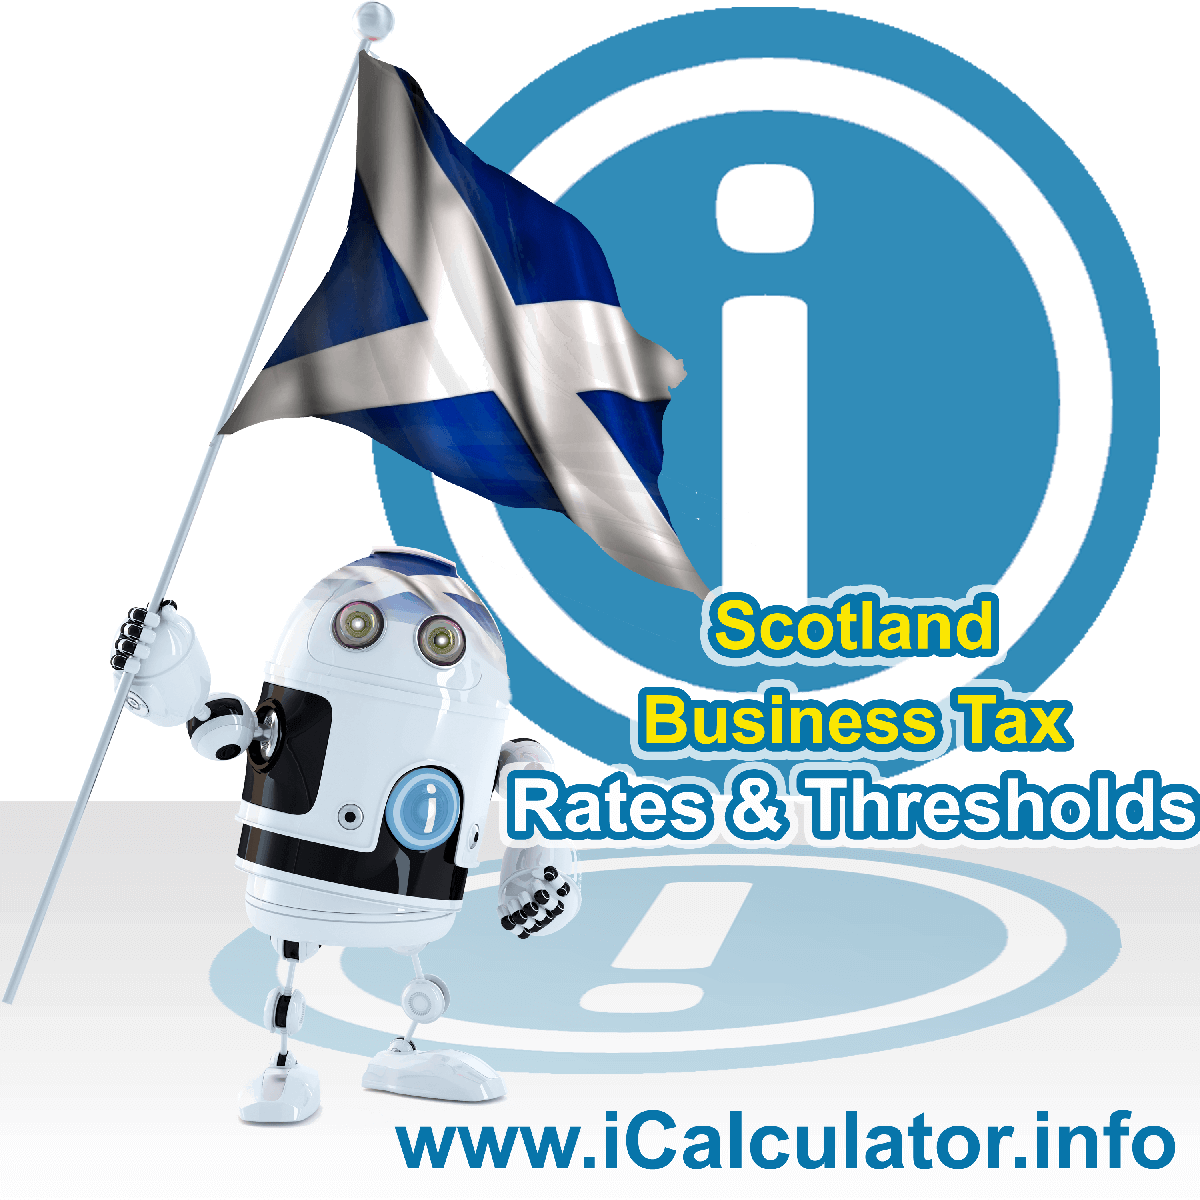 Scotland Corporation Tax Rates in 2018. This image shows the Scotland flag and information relating to the corporation tax formula for the Scotland Corporation Tax Calculator in 2018